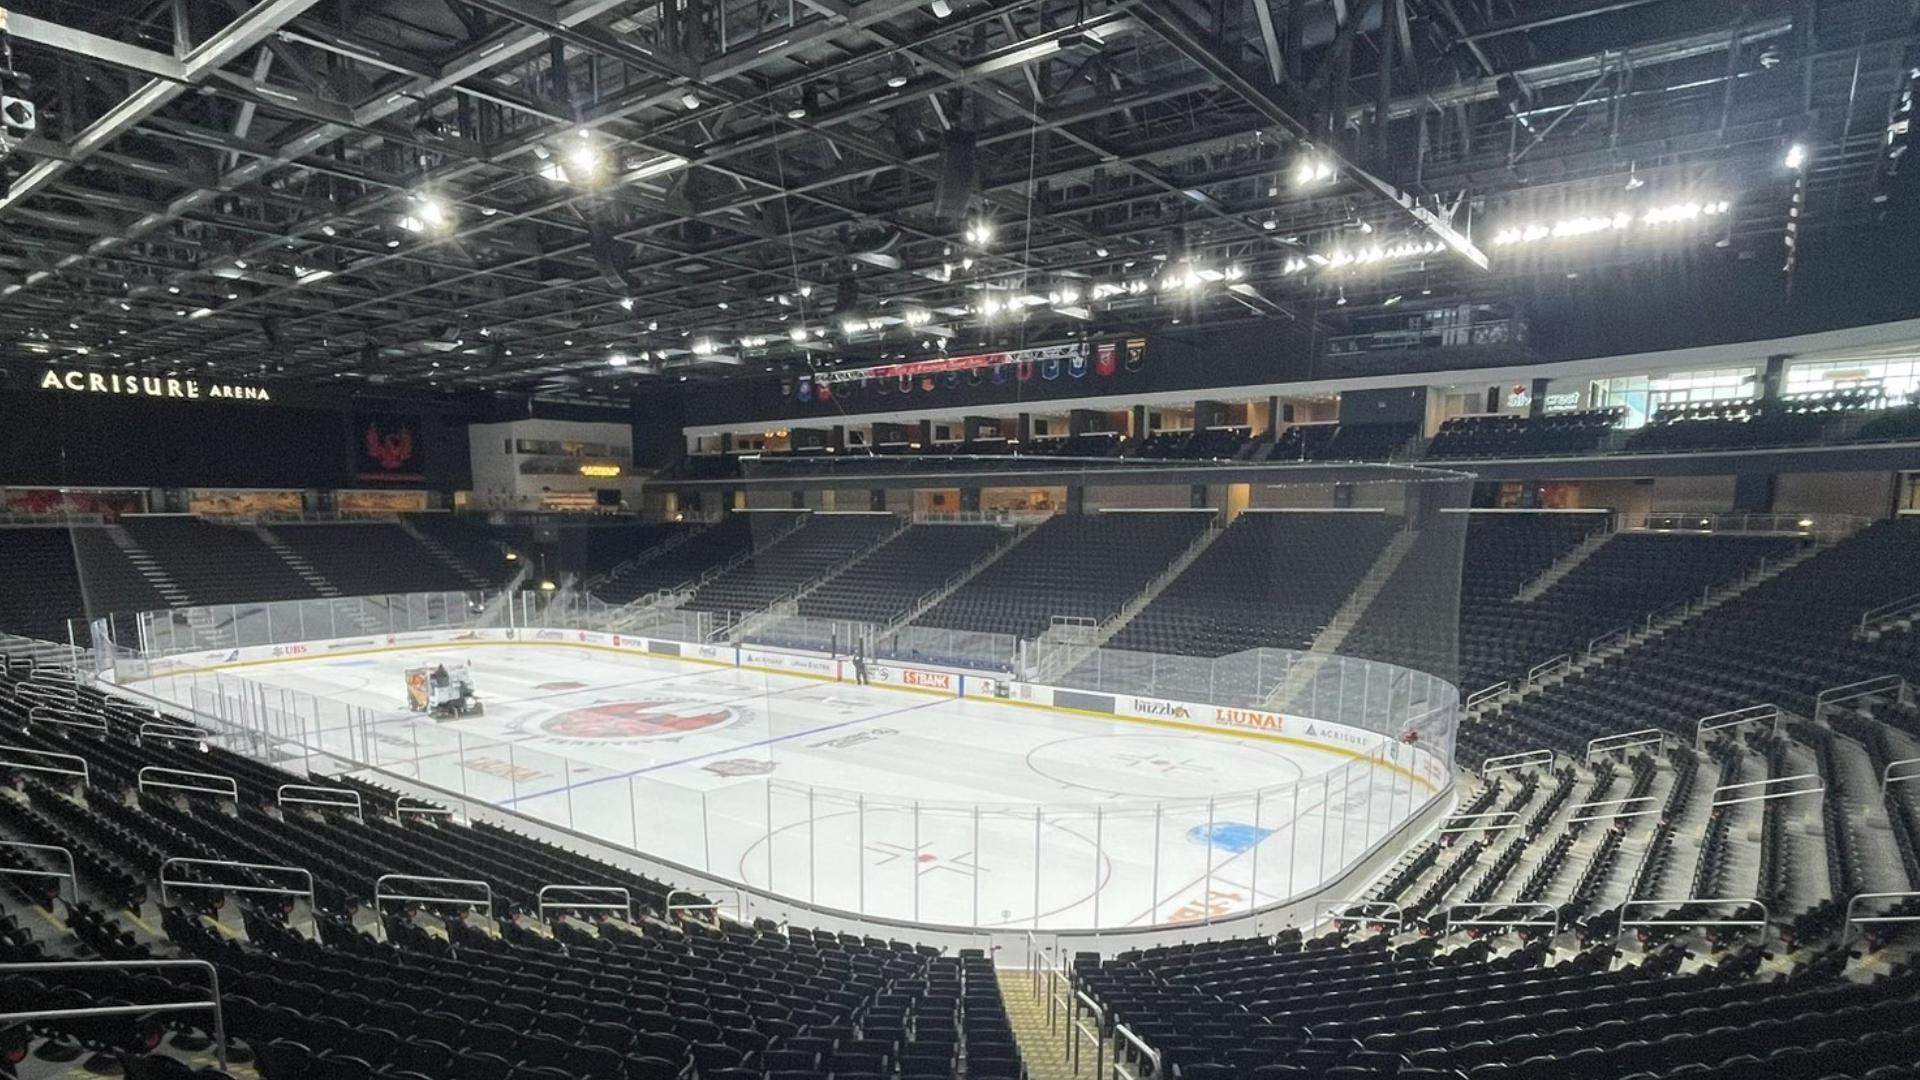 Acrisure Arena came with a $290 million price tag and is specially designed to host hockey and live music.